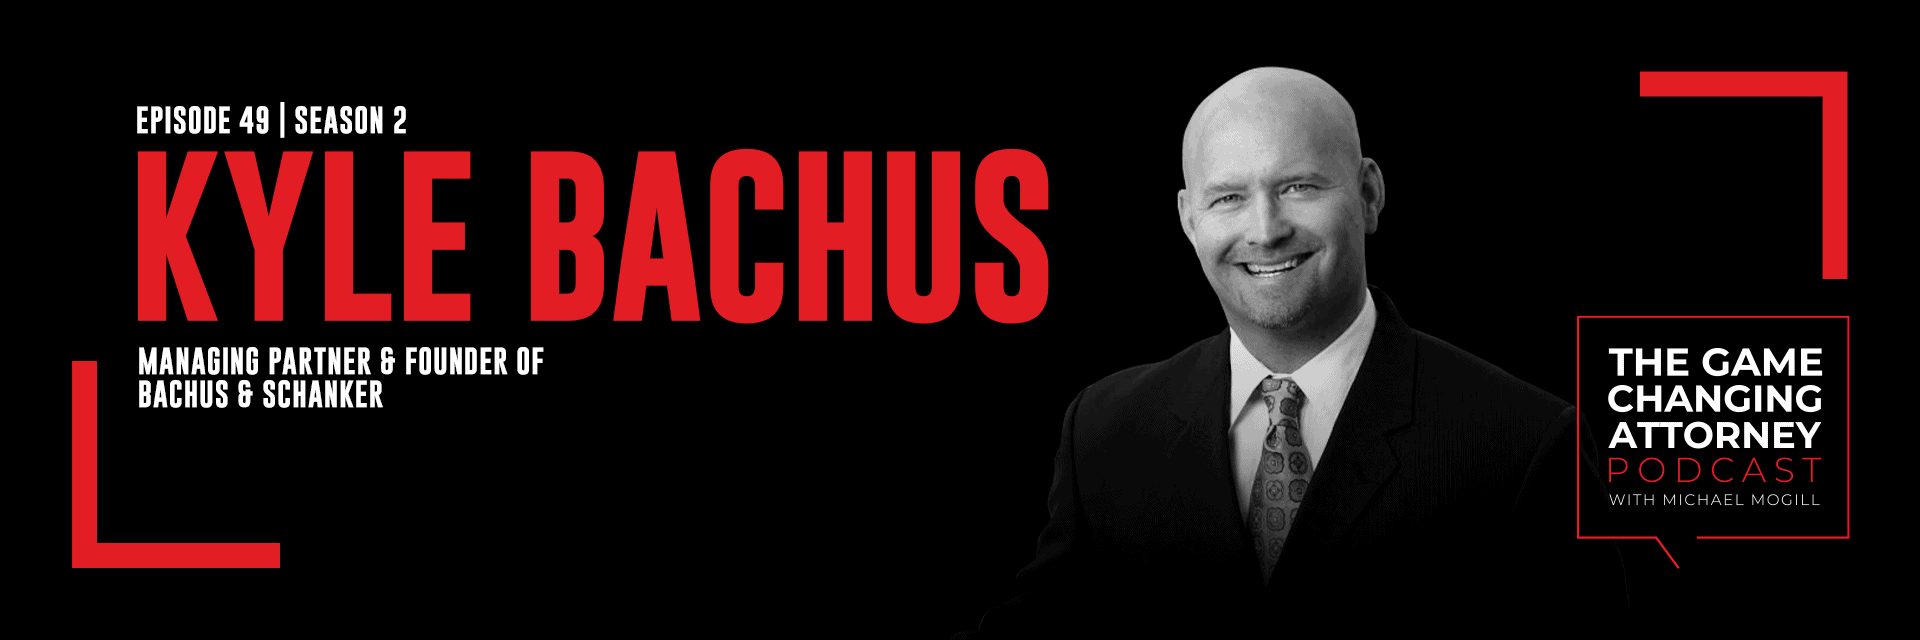 Kyle Bachus - The Game Changing Attorney Podcast - Desktop